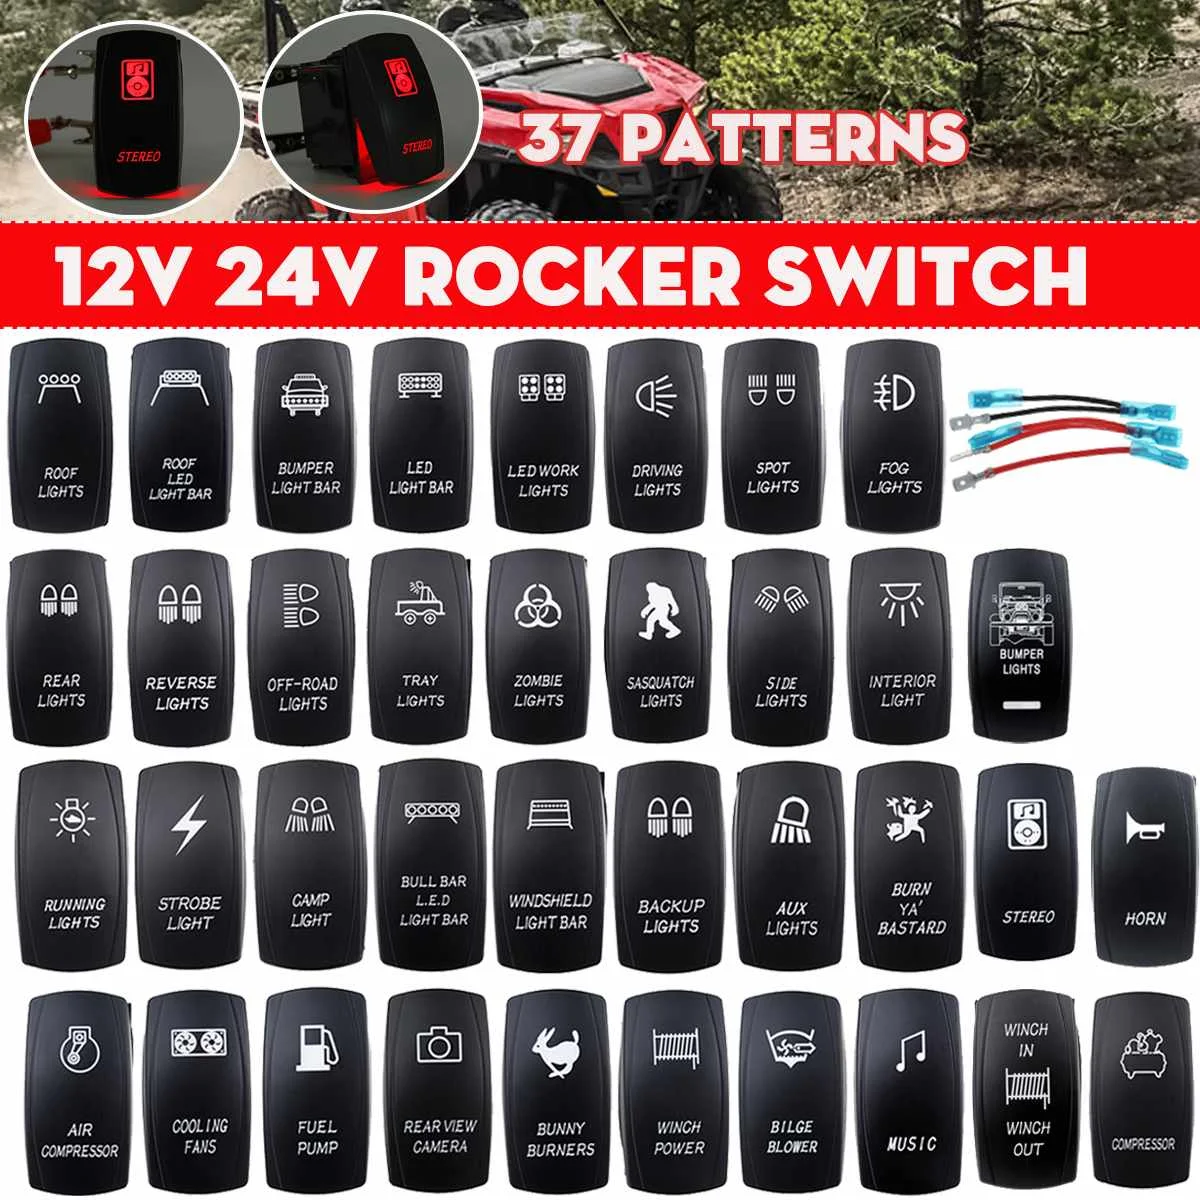 1pc Universal 12V 24V LED Rocker Switch Dual LED Red Light Rocker Switches  Waterproof For Car Boat Bus RV Caravan|Car Switches & Relays| - AliExpress